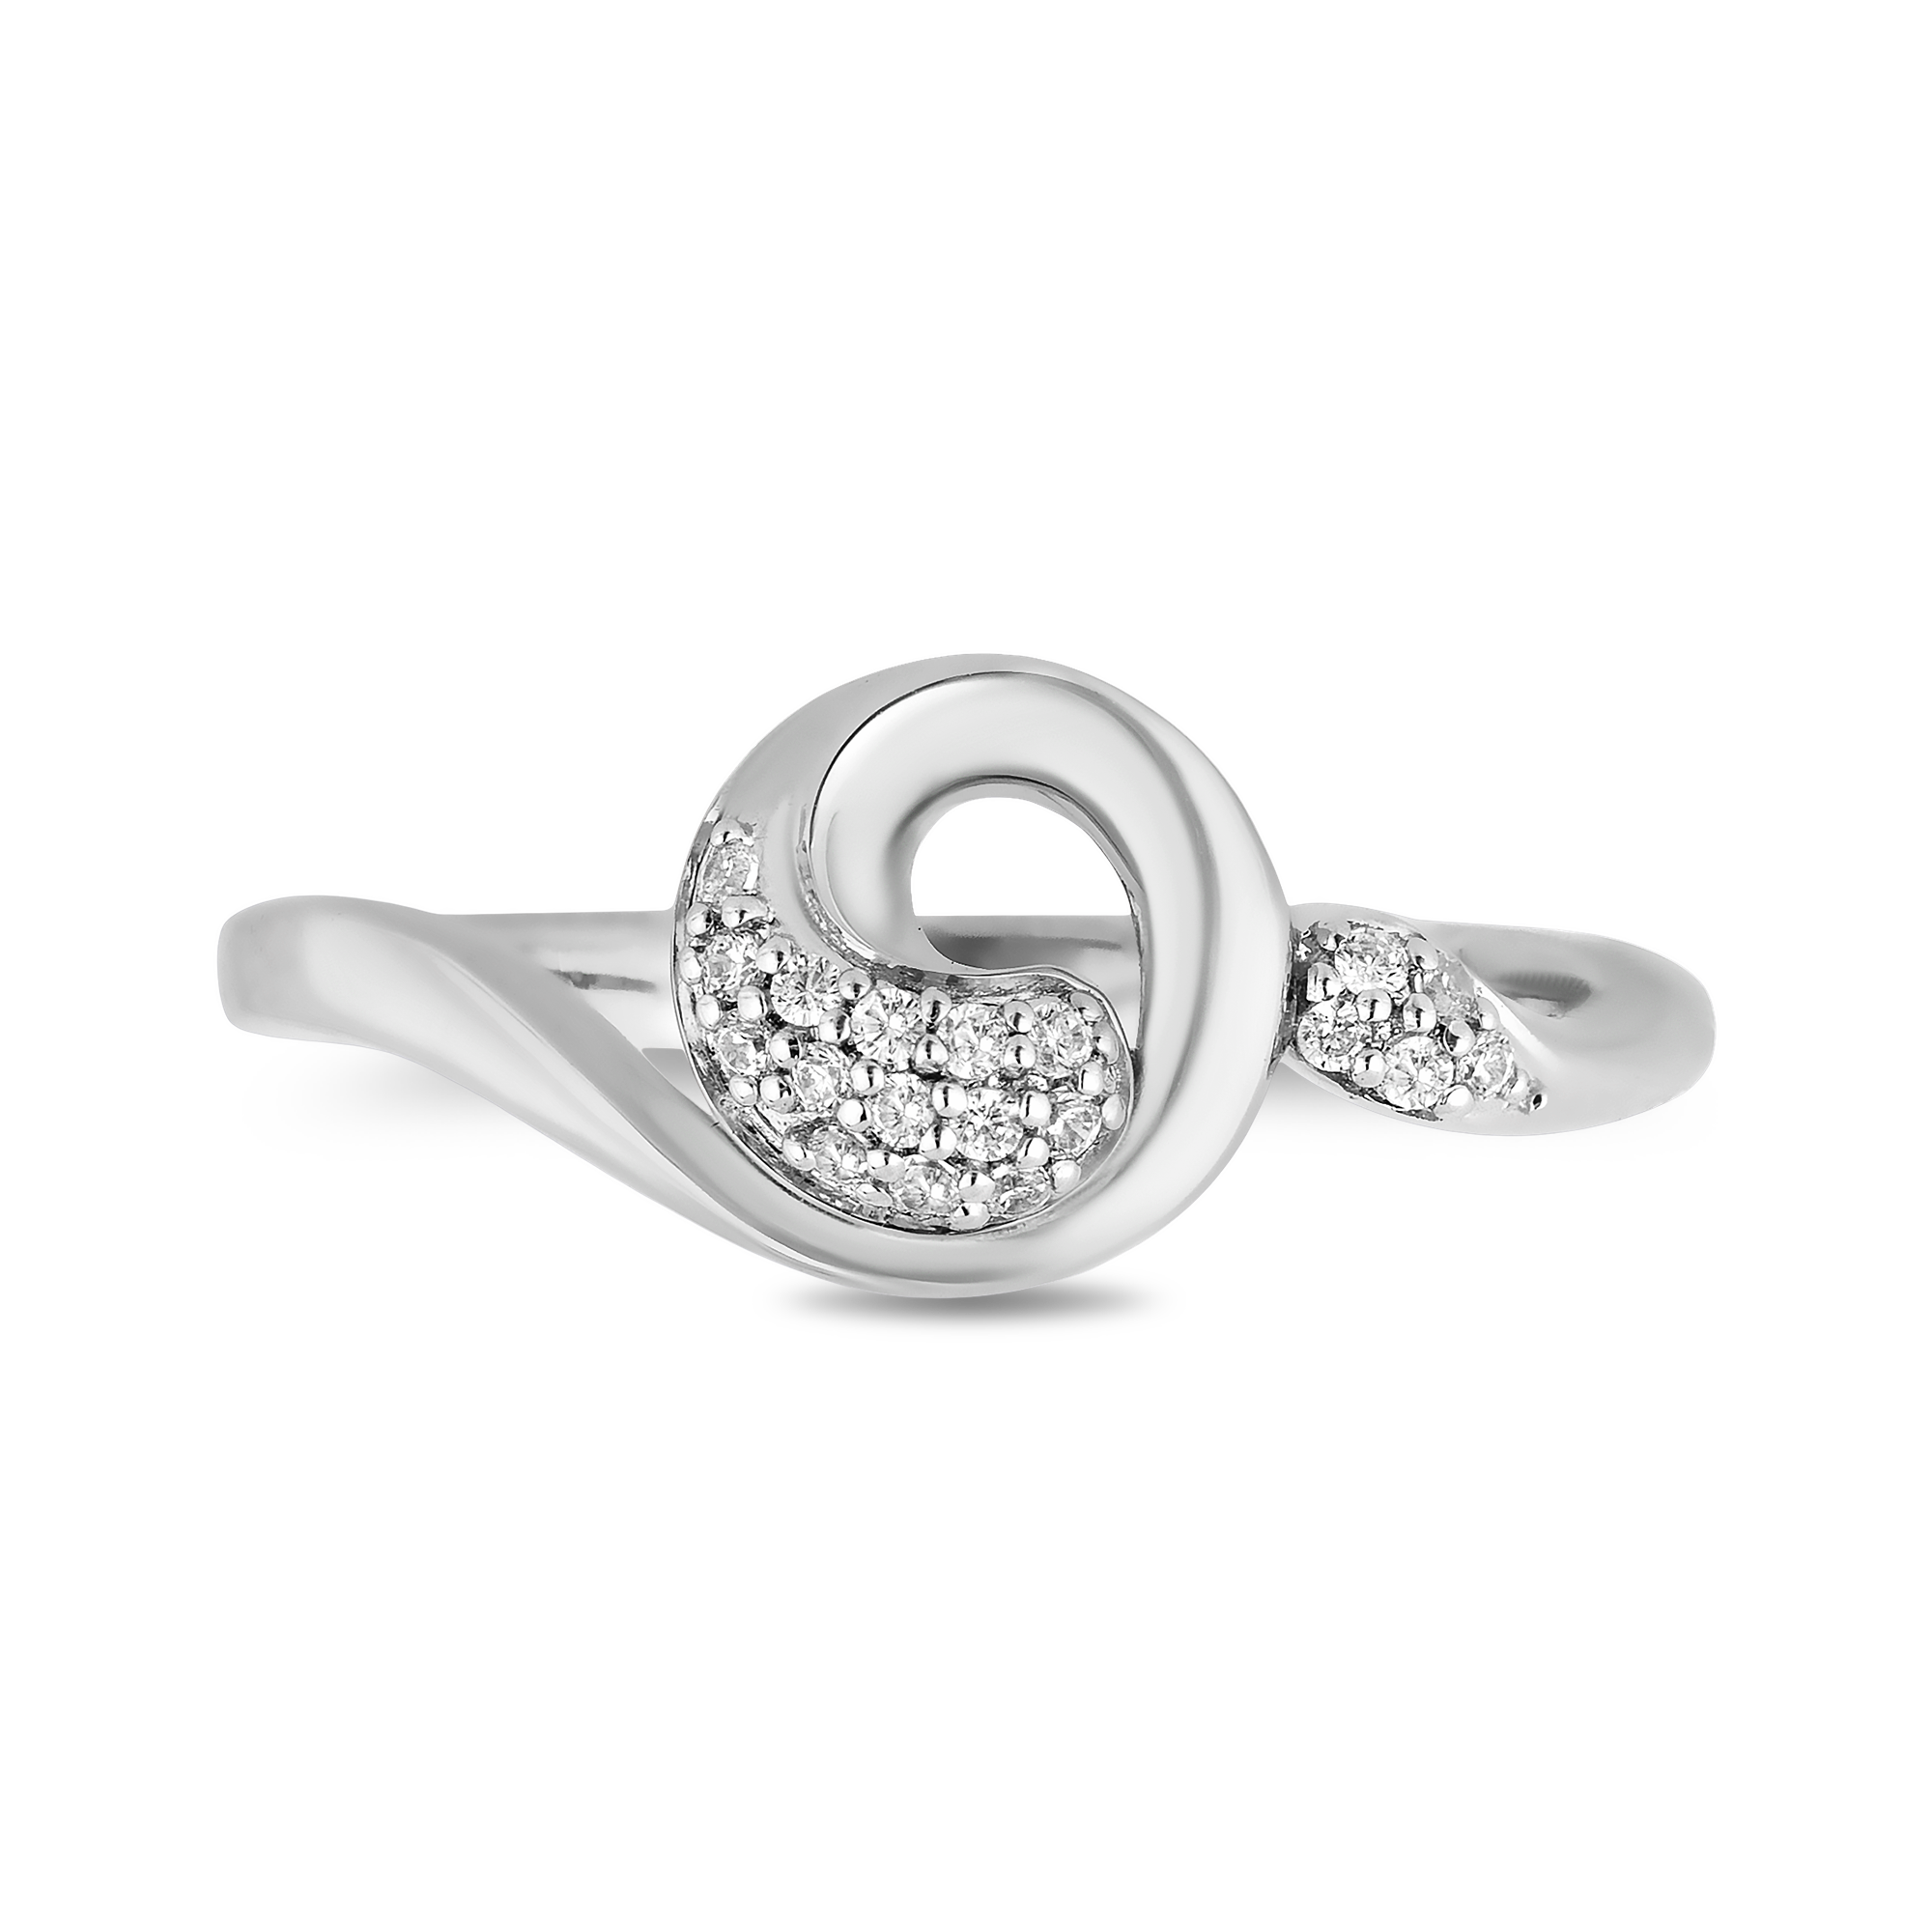 Silver Rings - Shop from Latest 2021 Collection of Silver Rings